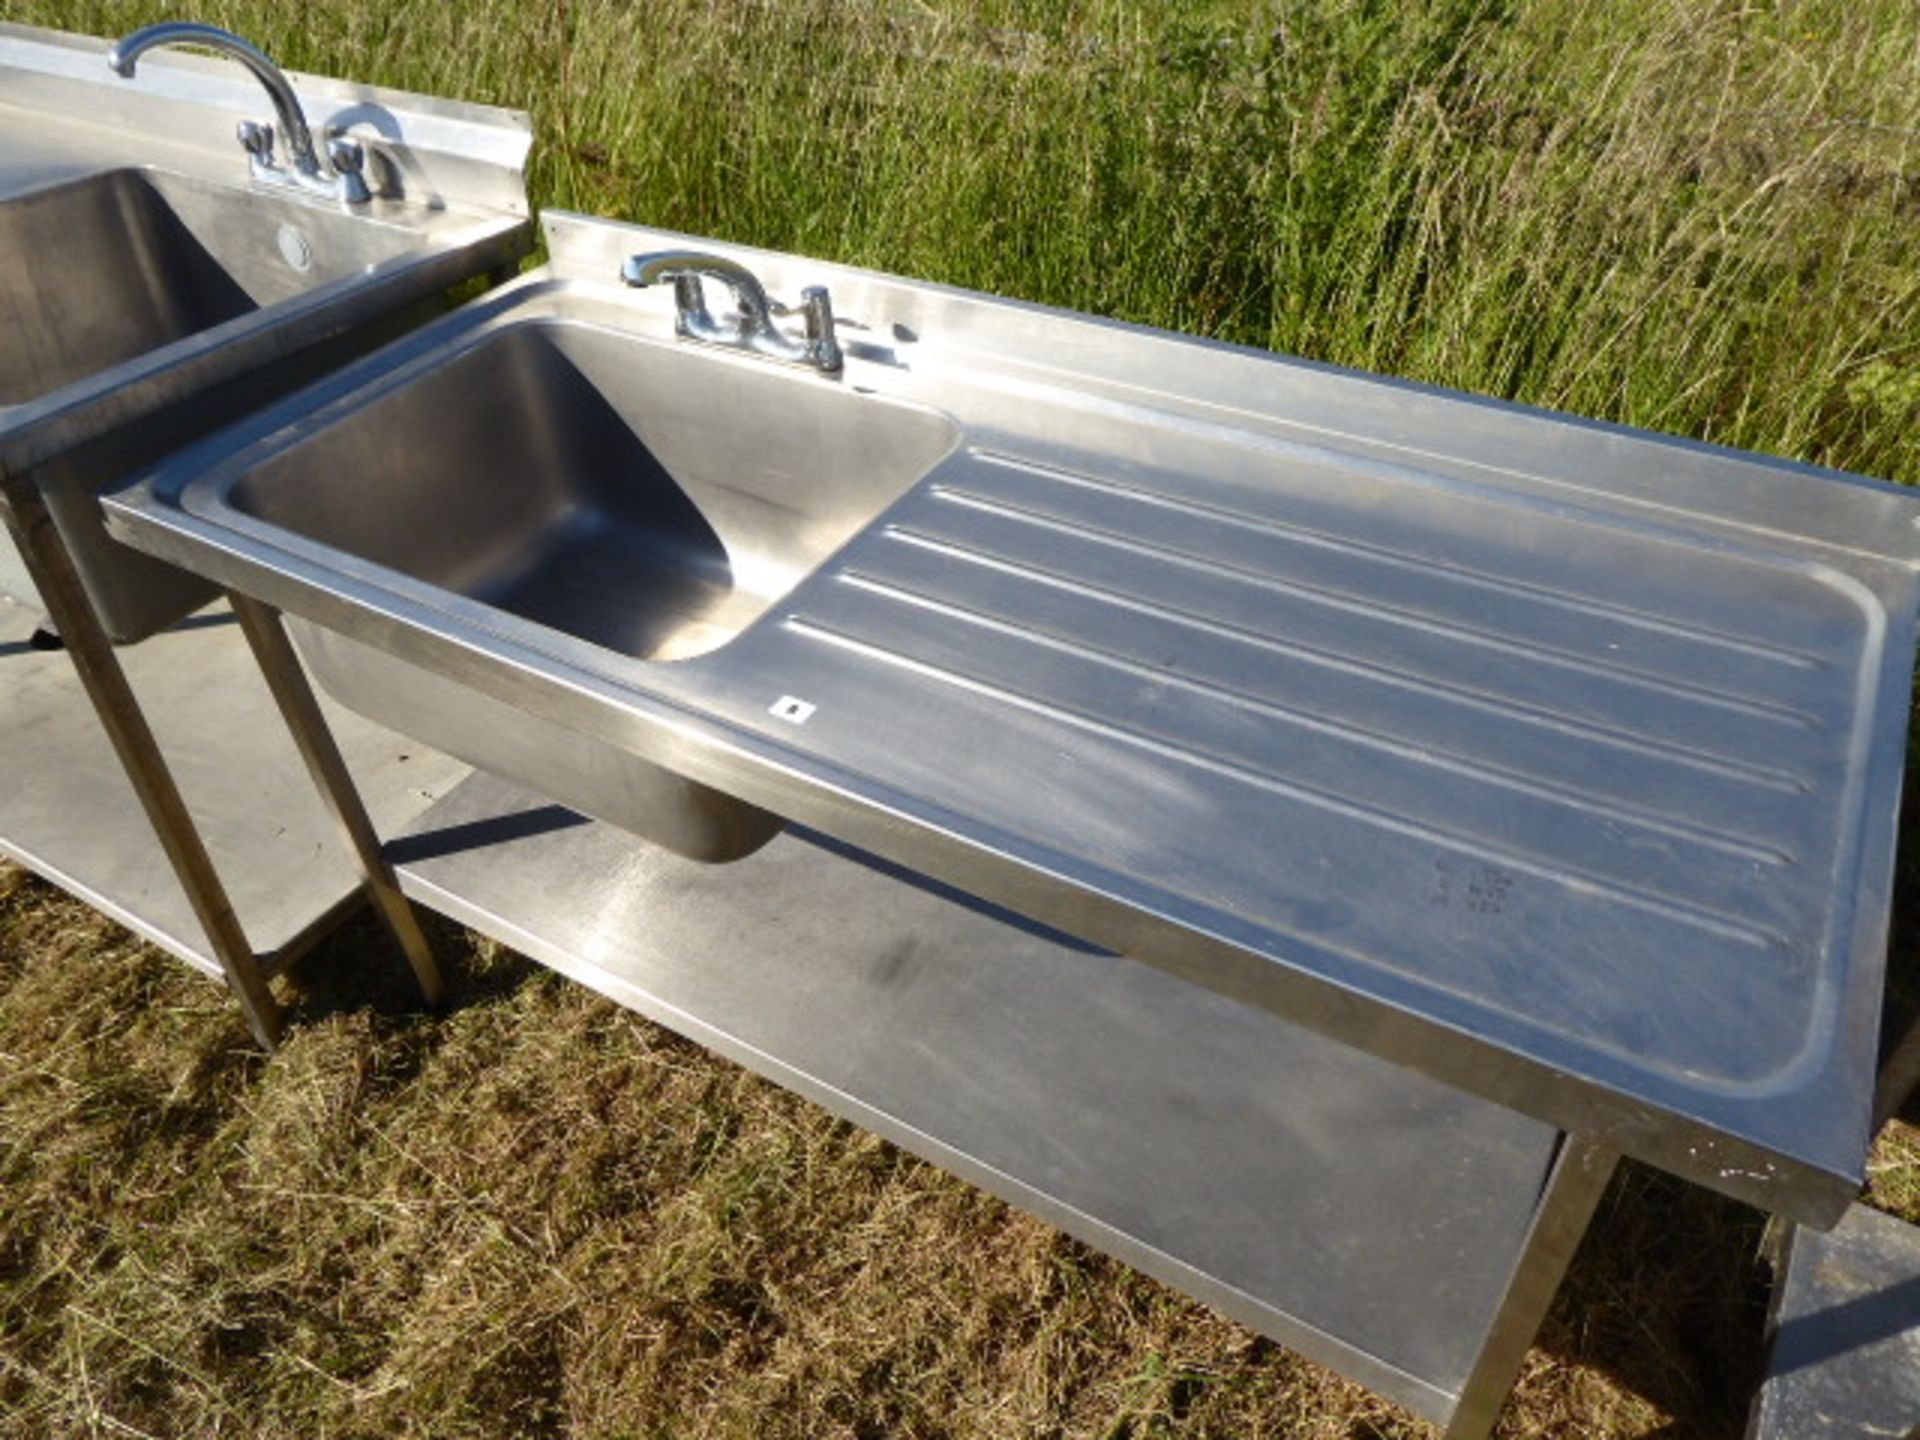 Stainless steel large single bowl sink unit with tap set, draining board and shelf under, 1500mm - Image 2 of 3